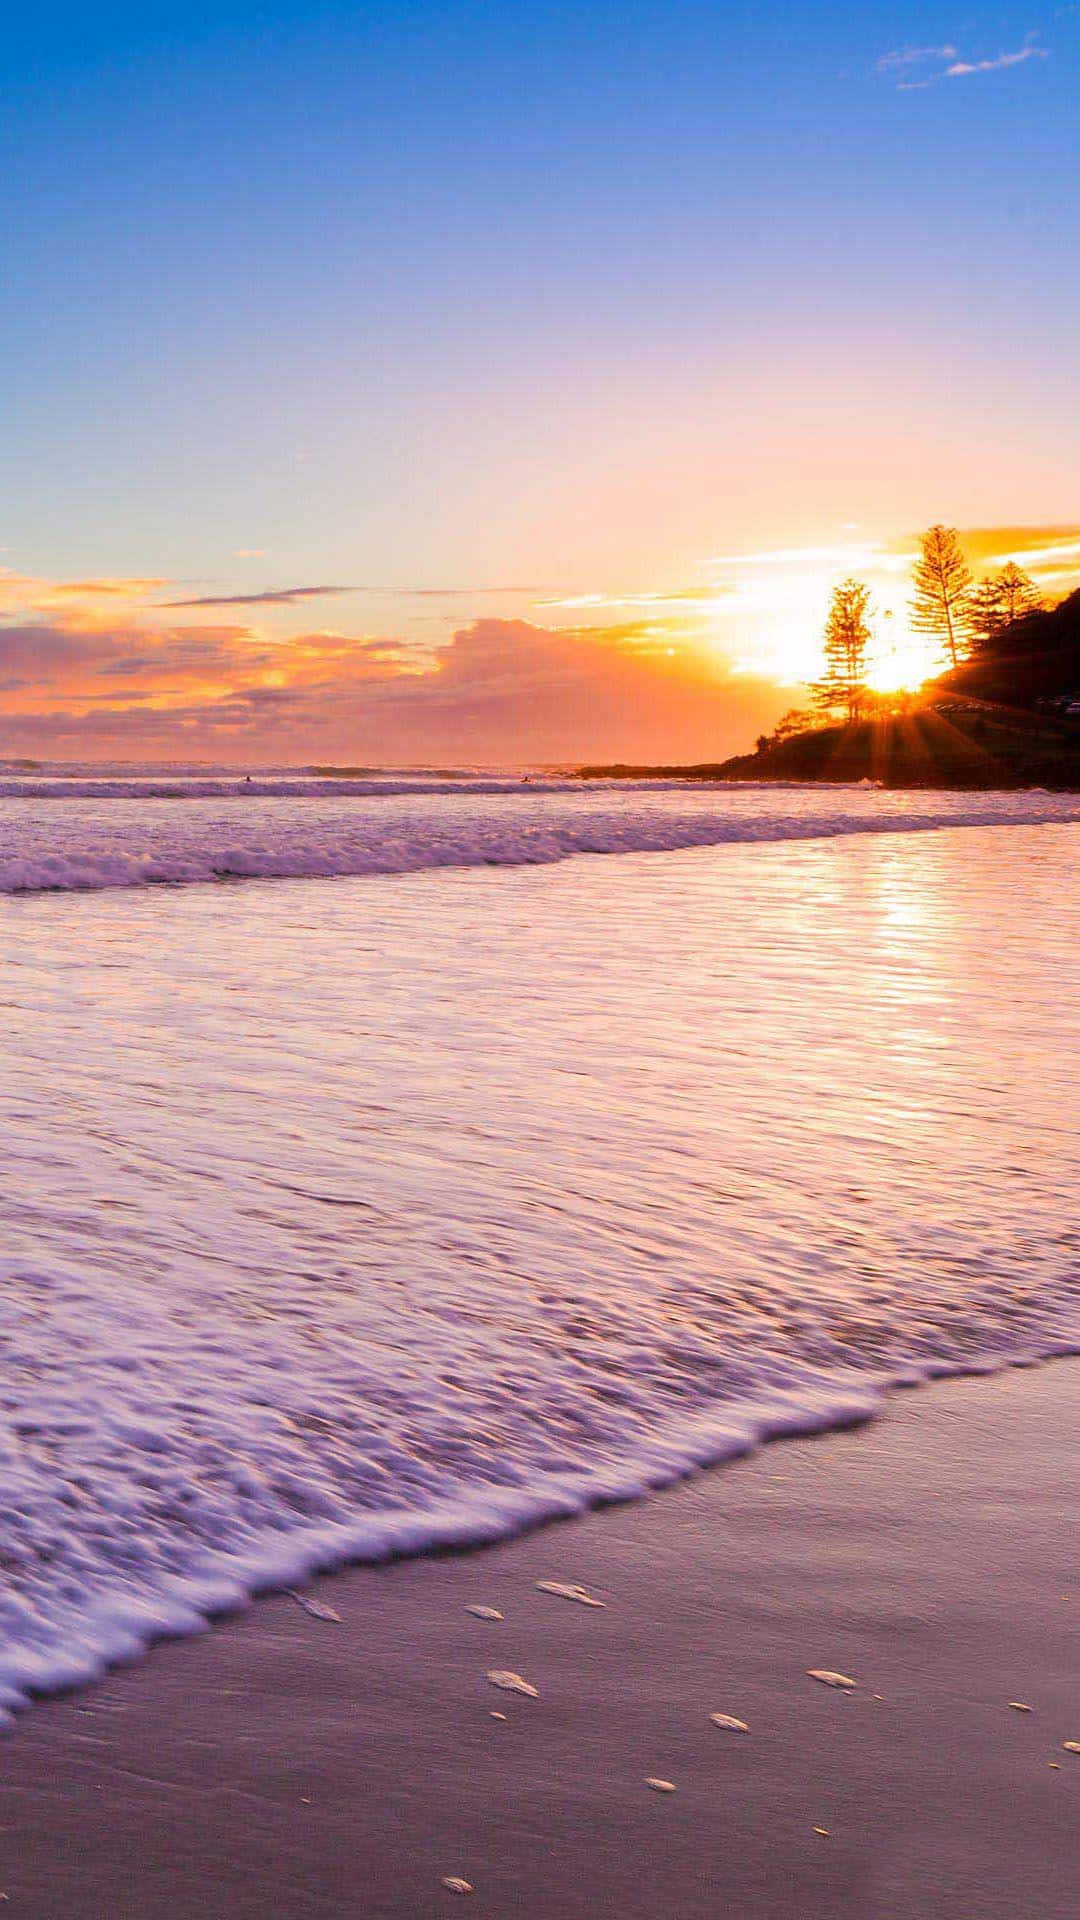 Take in the beauty of the setting sun on a pristine beach. Wallpaper